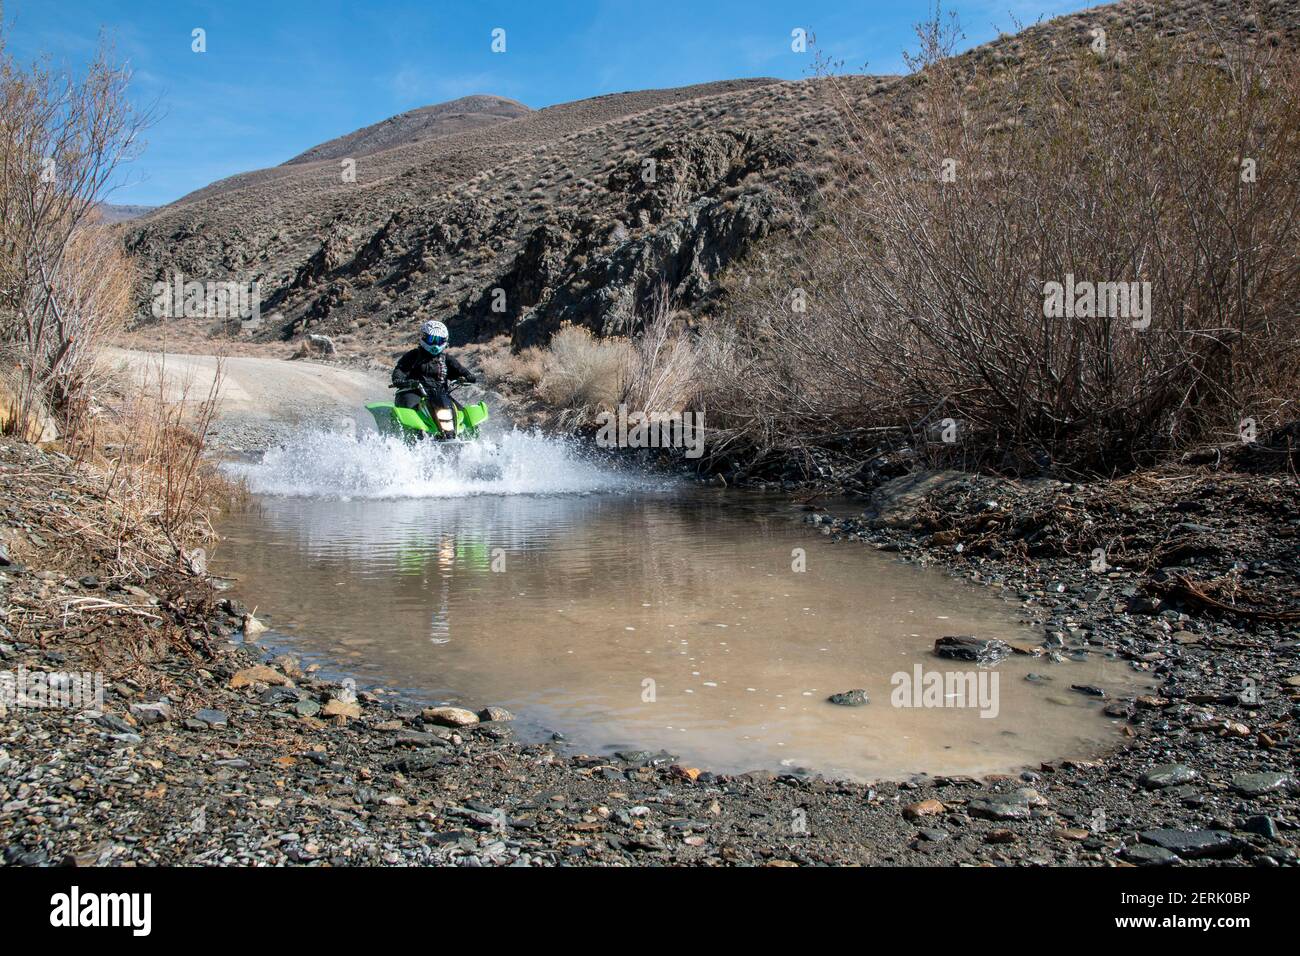 Silver Canyon is an excellent place for motorsports in Inyo County, CA, USA and it provides beautiful views. Stock Photo